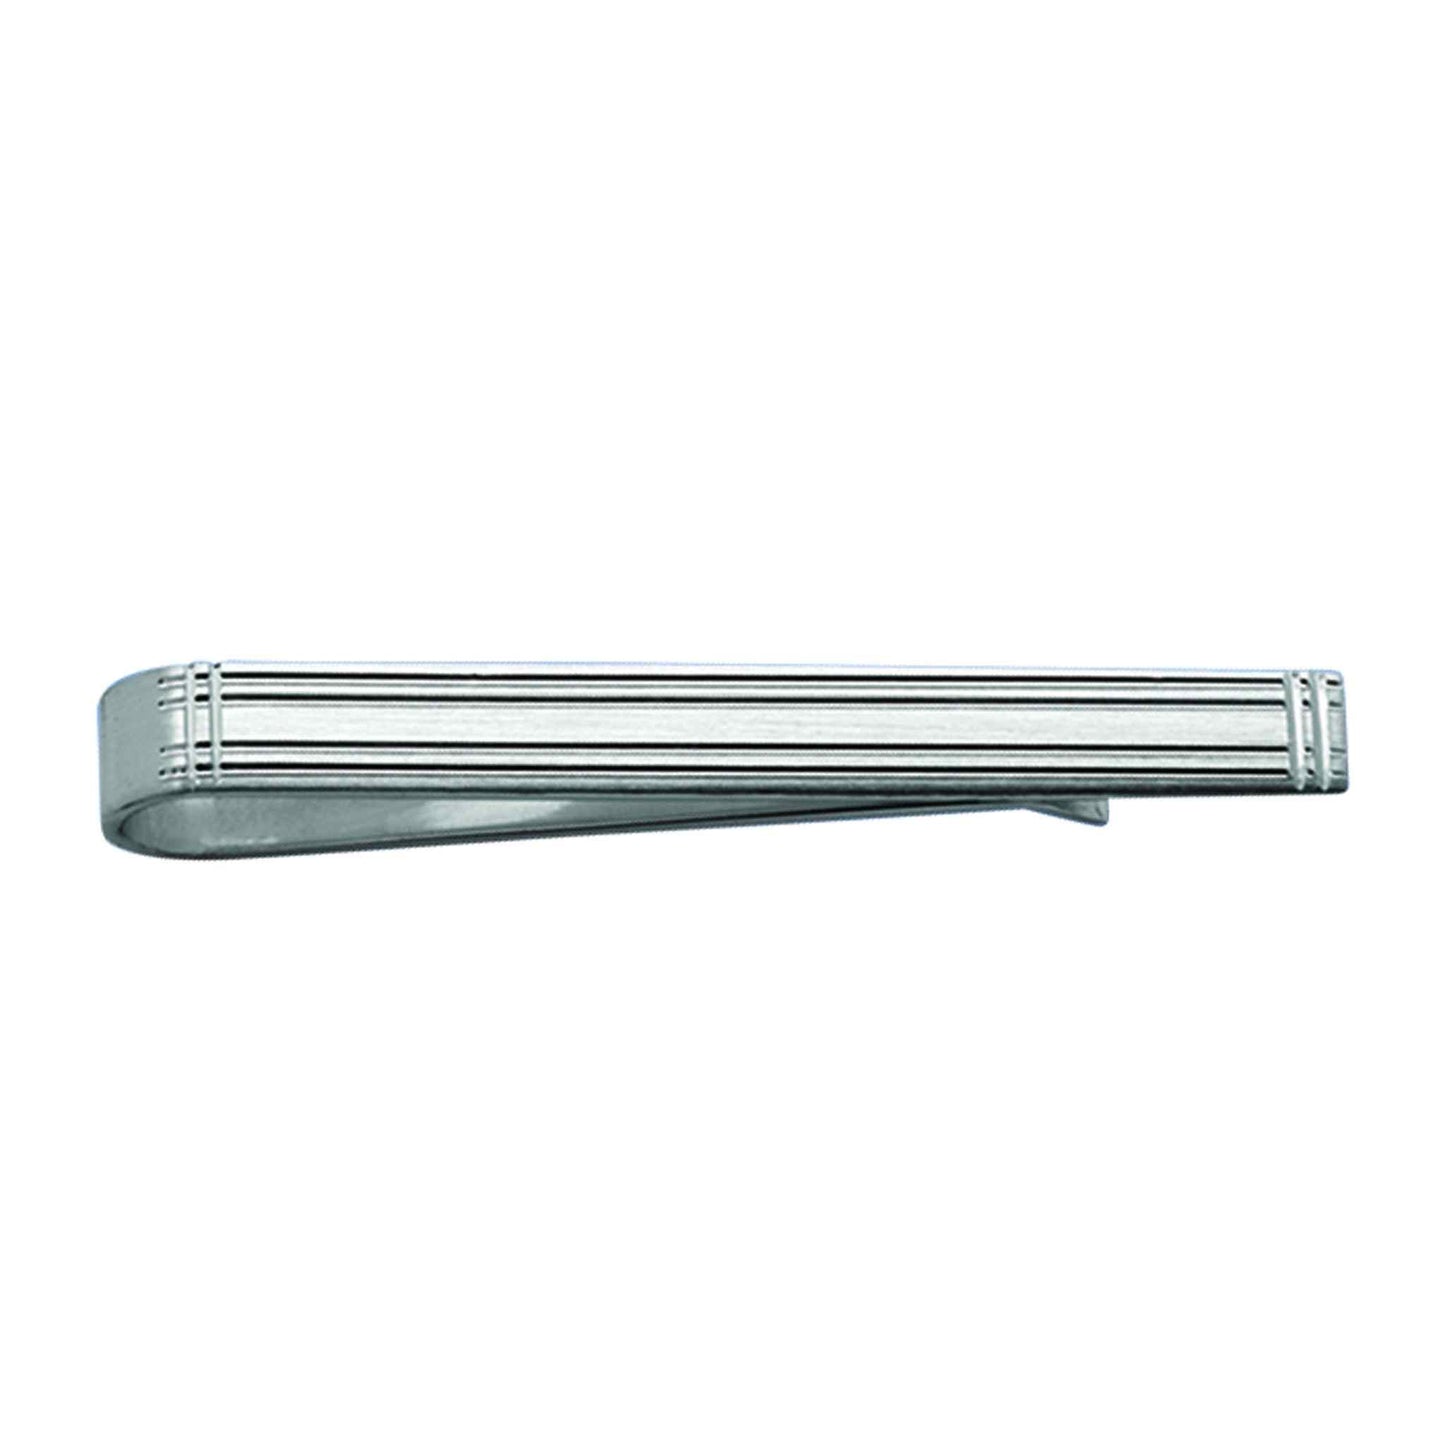 A sterling silver satin finish plaid tie slide displayed on a neutral white background.